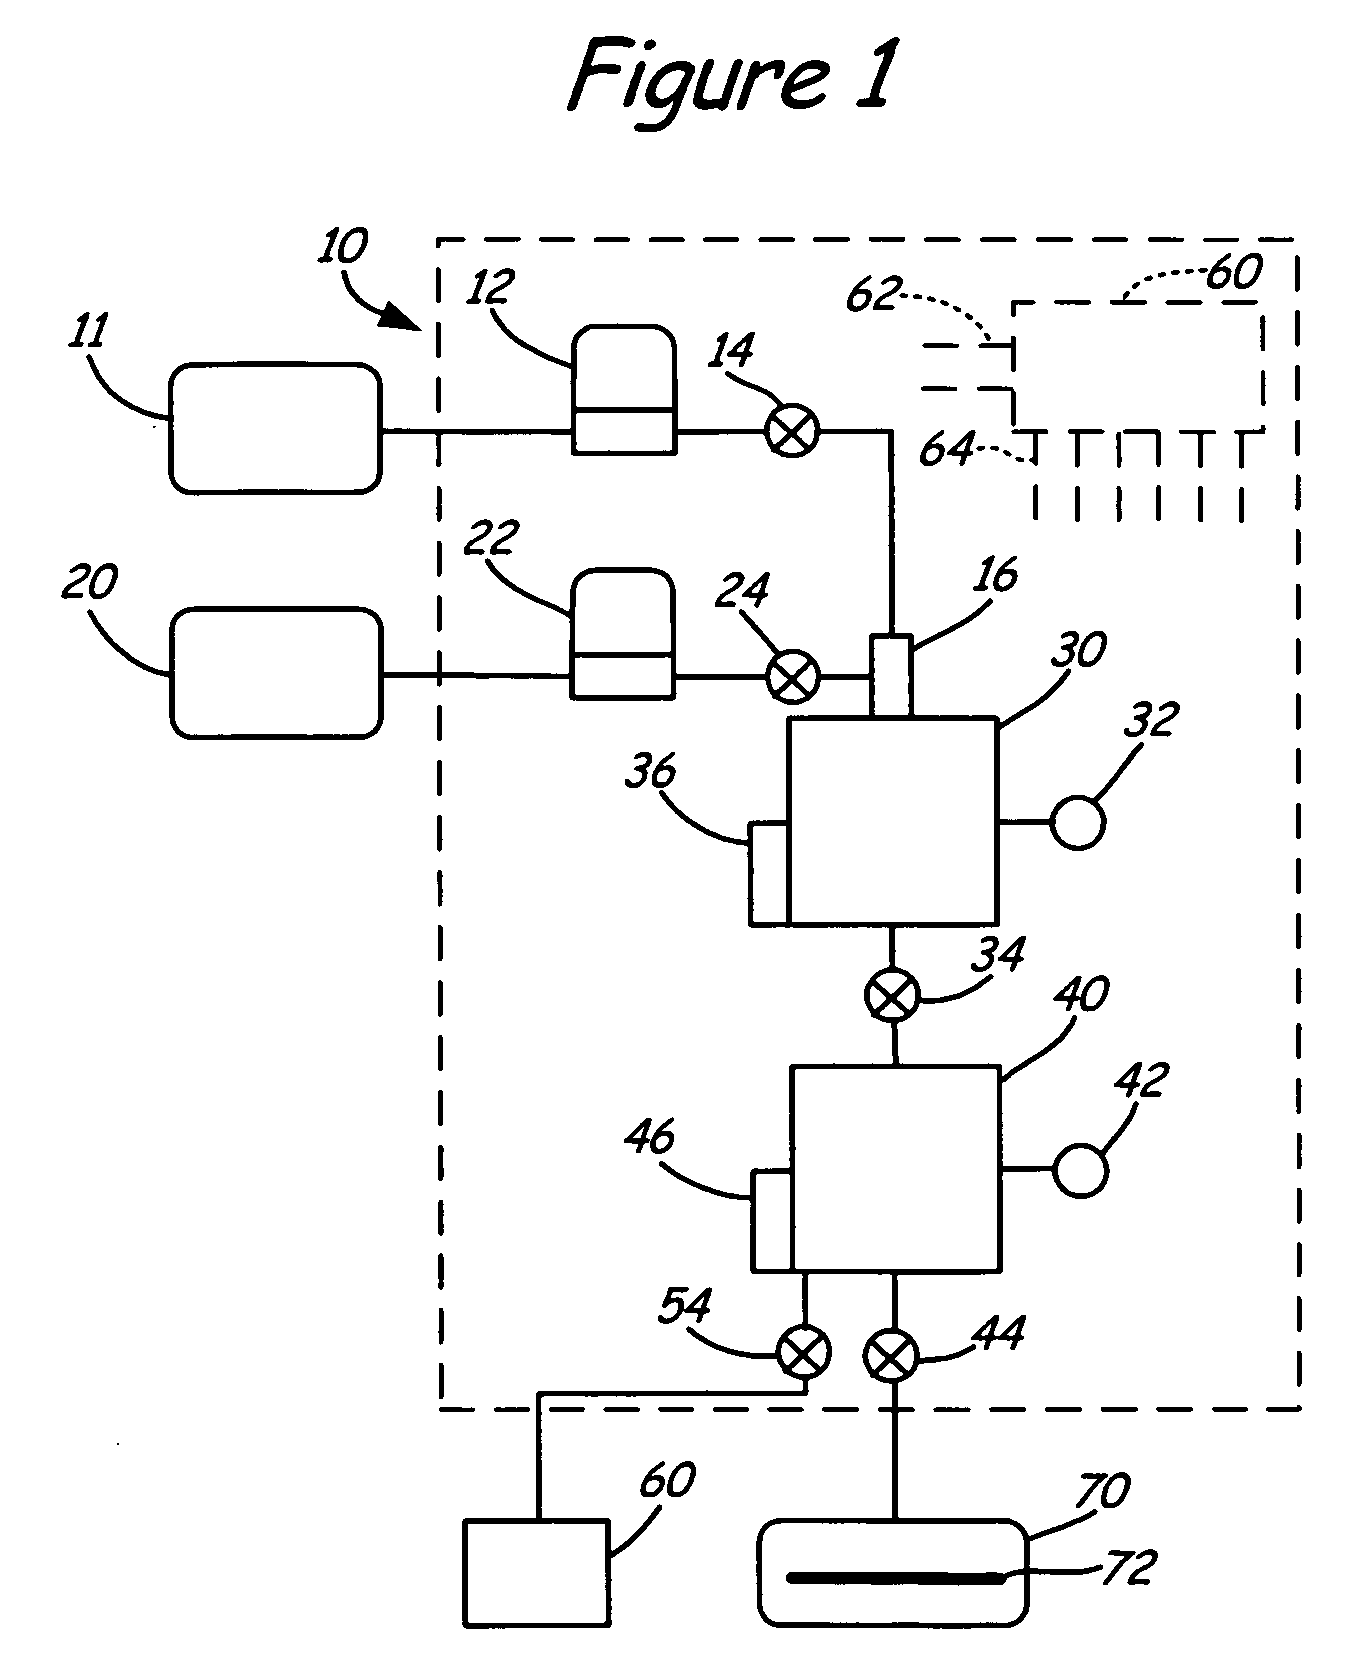 High accuracy vapor generation and delivery for thin film deposition